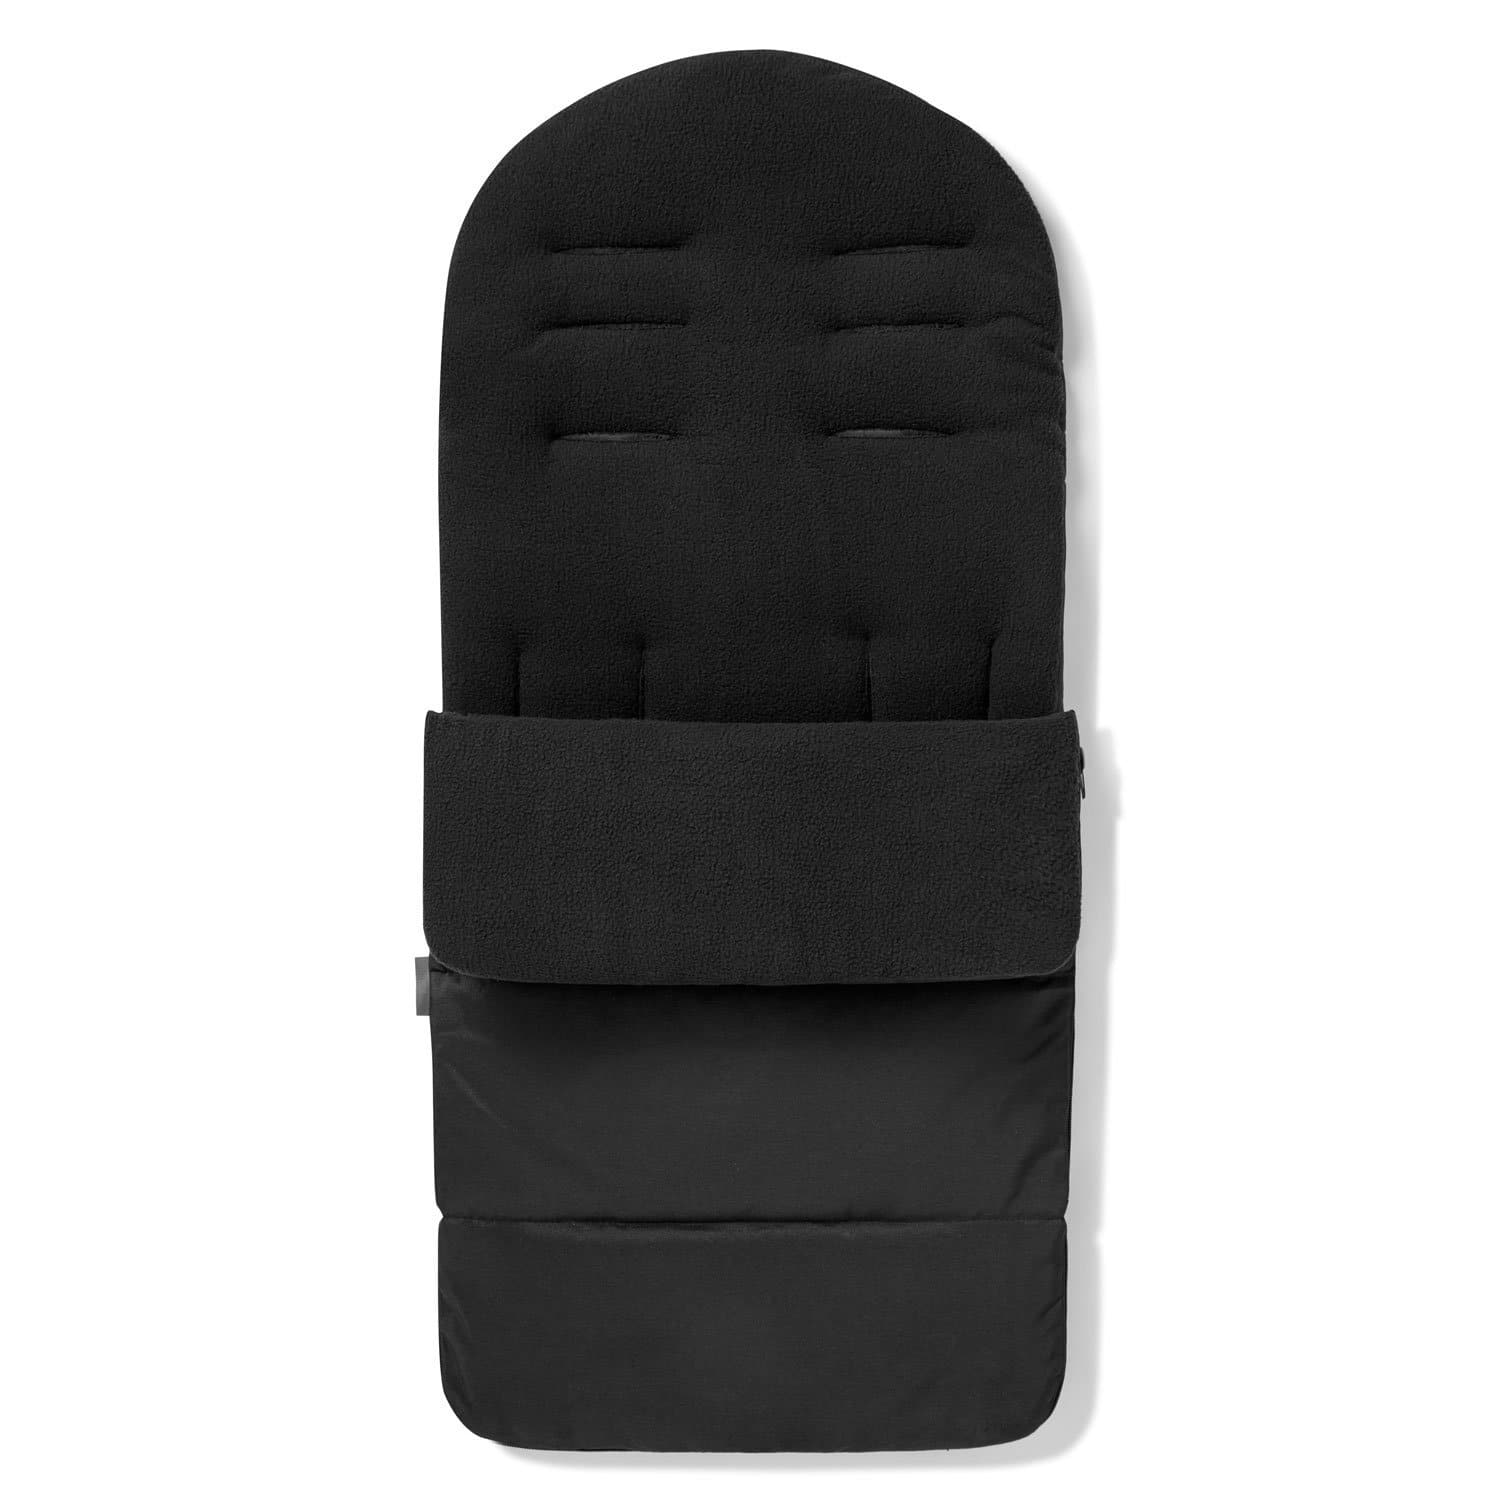 Premium Footmuff / Cosy Toes Compatible with Greentom - Black Jack / Fits All Models | For Your Little One